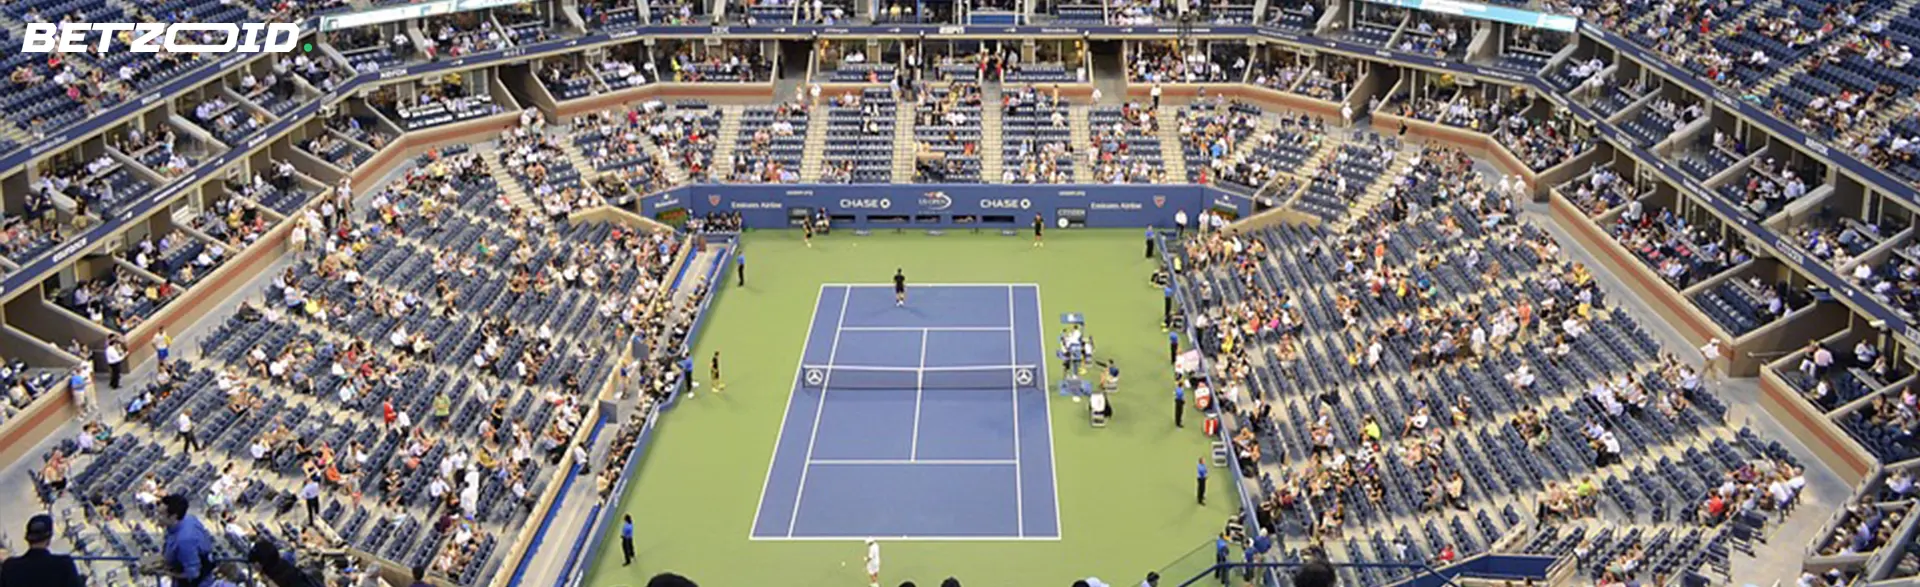 Overhead view of a tennis tournament at a large stadium, with spectators and players during a match.